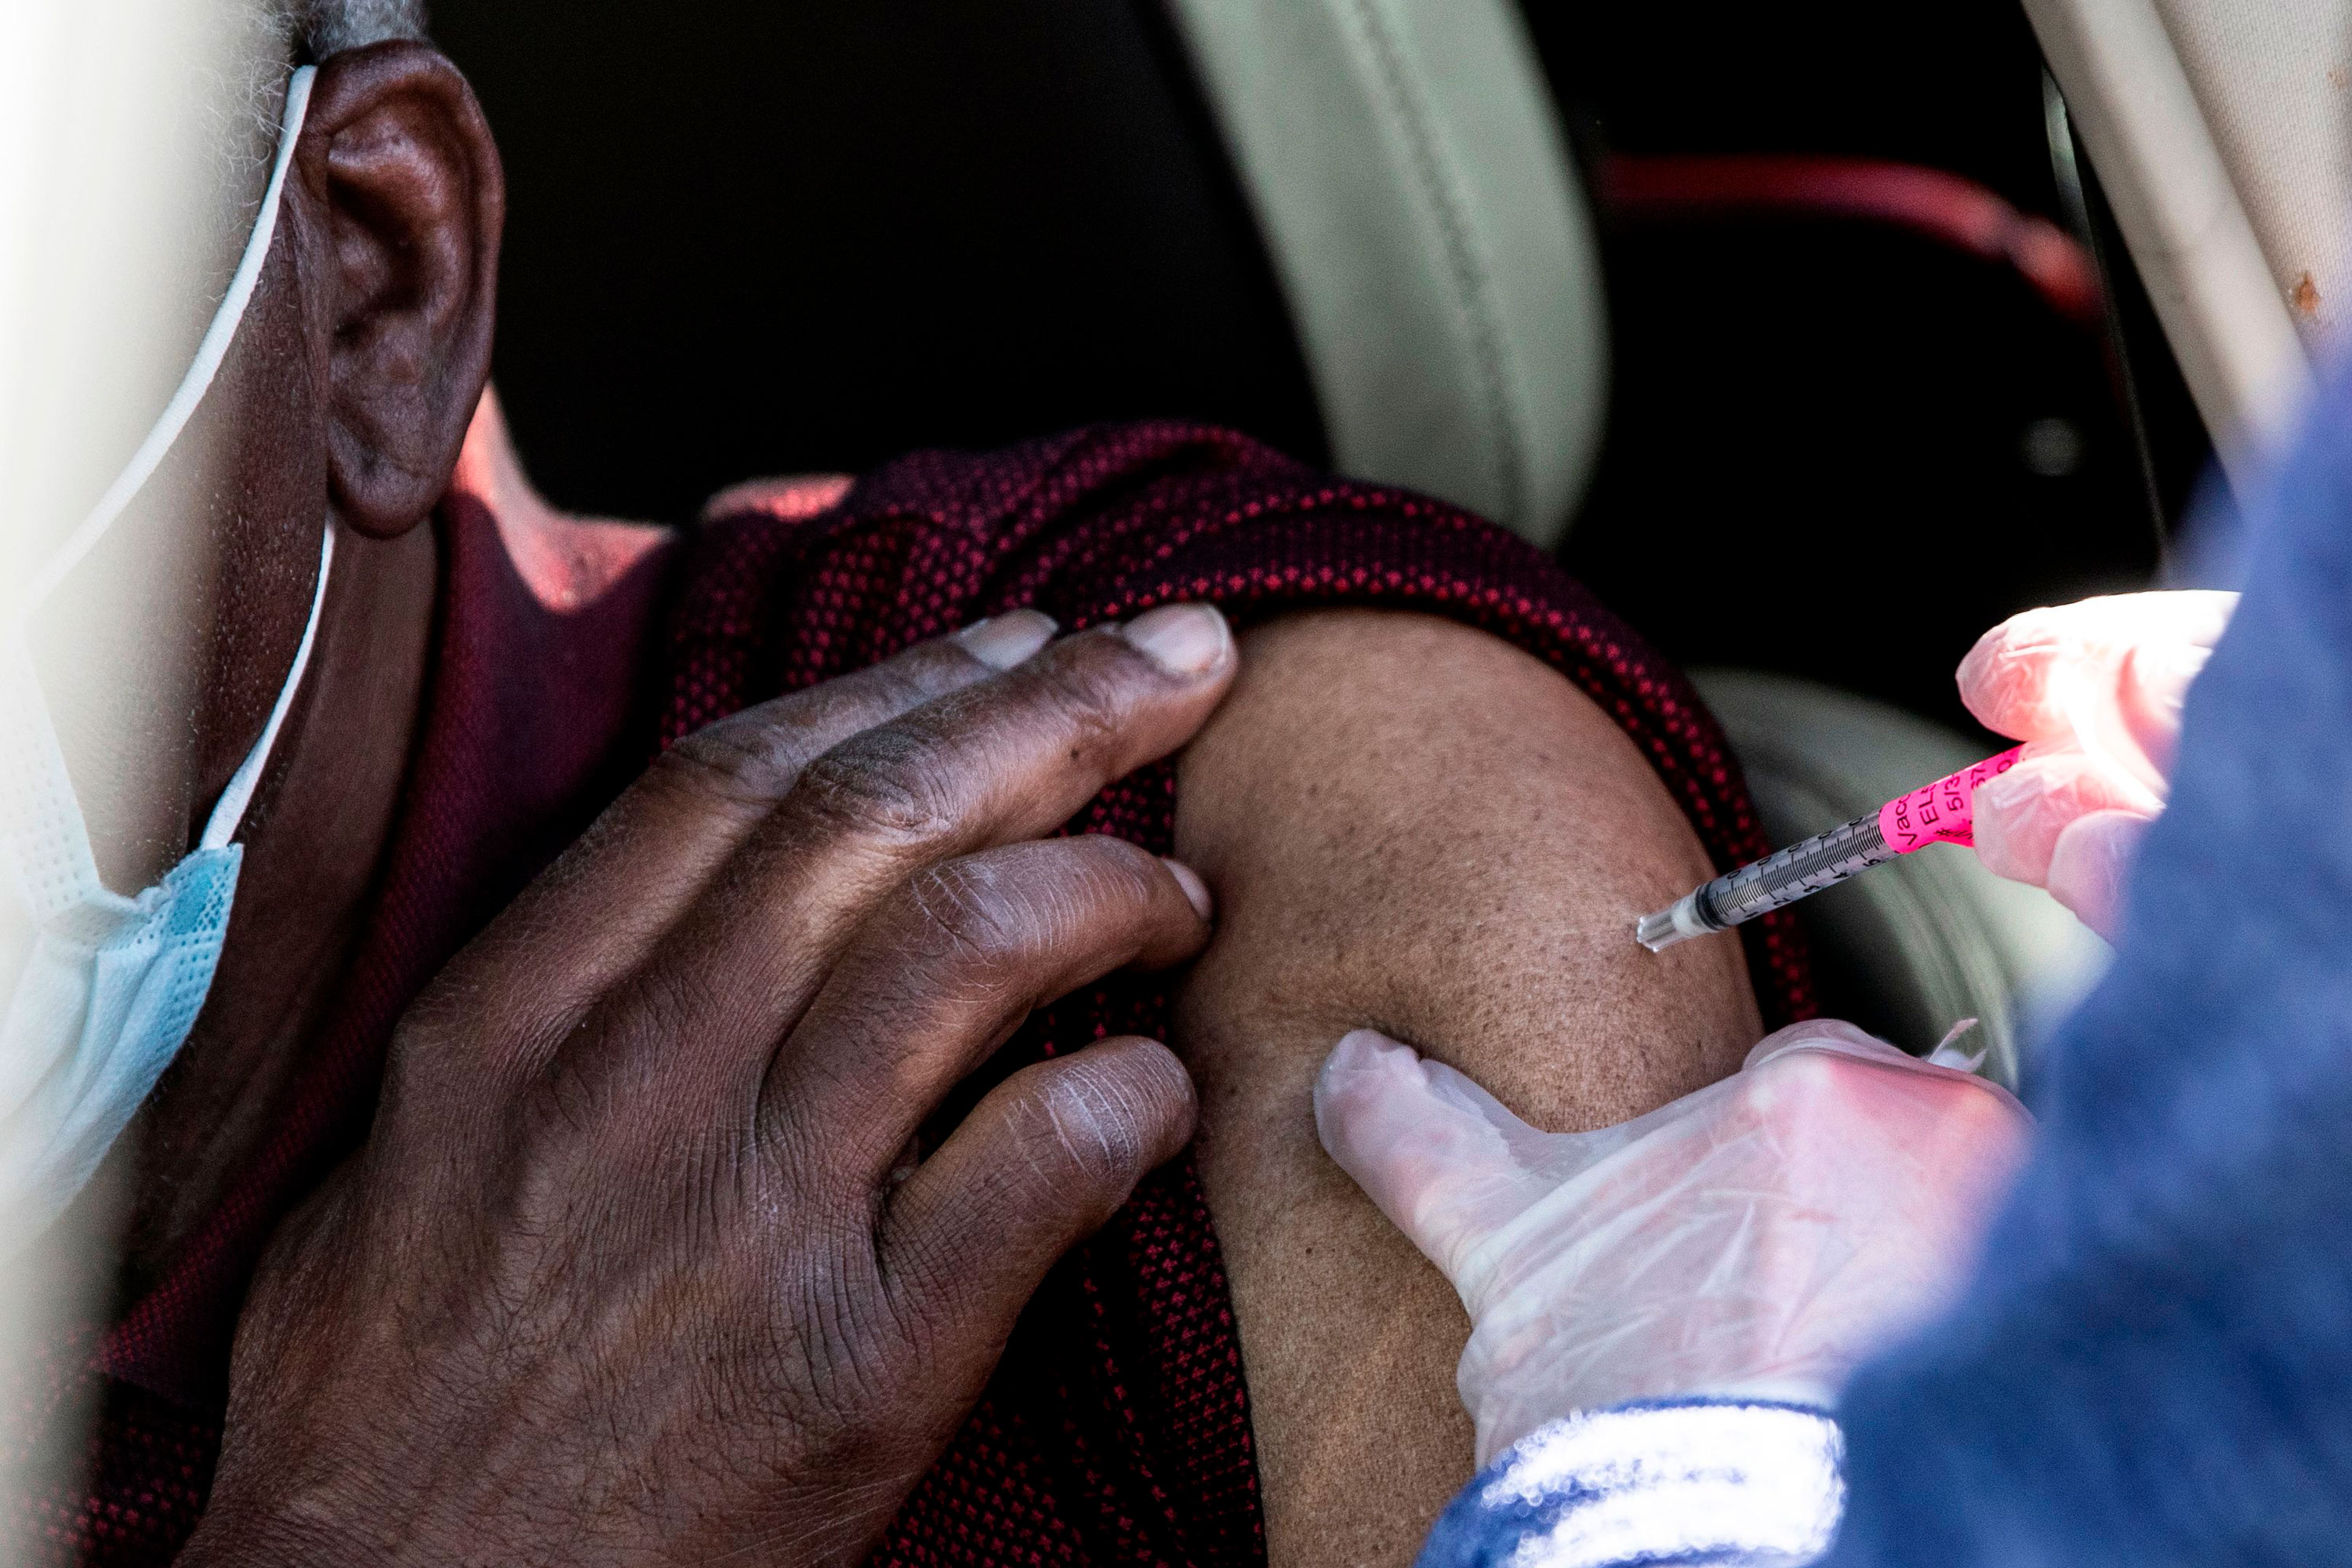 A man gets his first dose of the Covid-19 vaccine administered at Coors Field baseball stadium on January 30 in Denver.